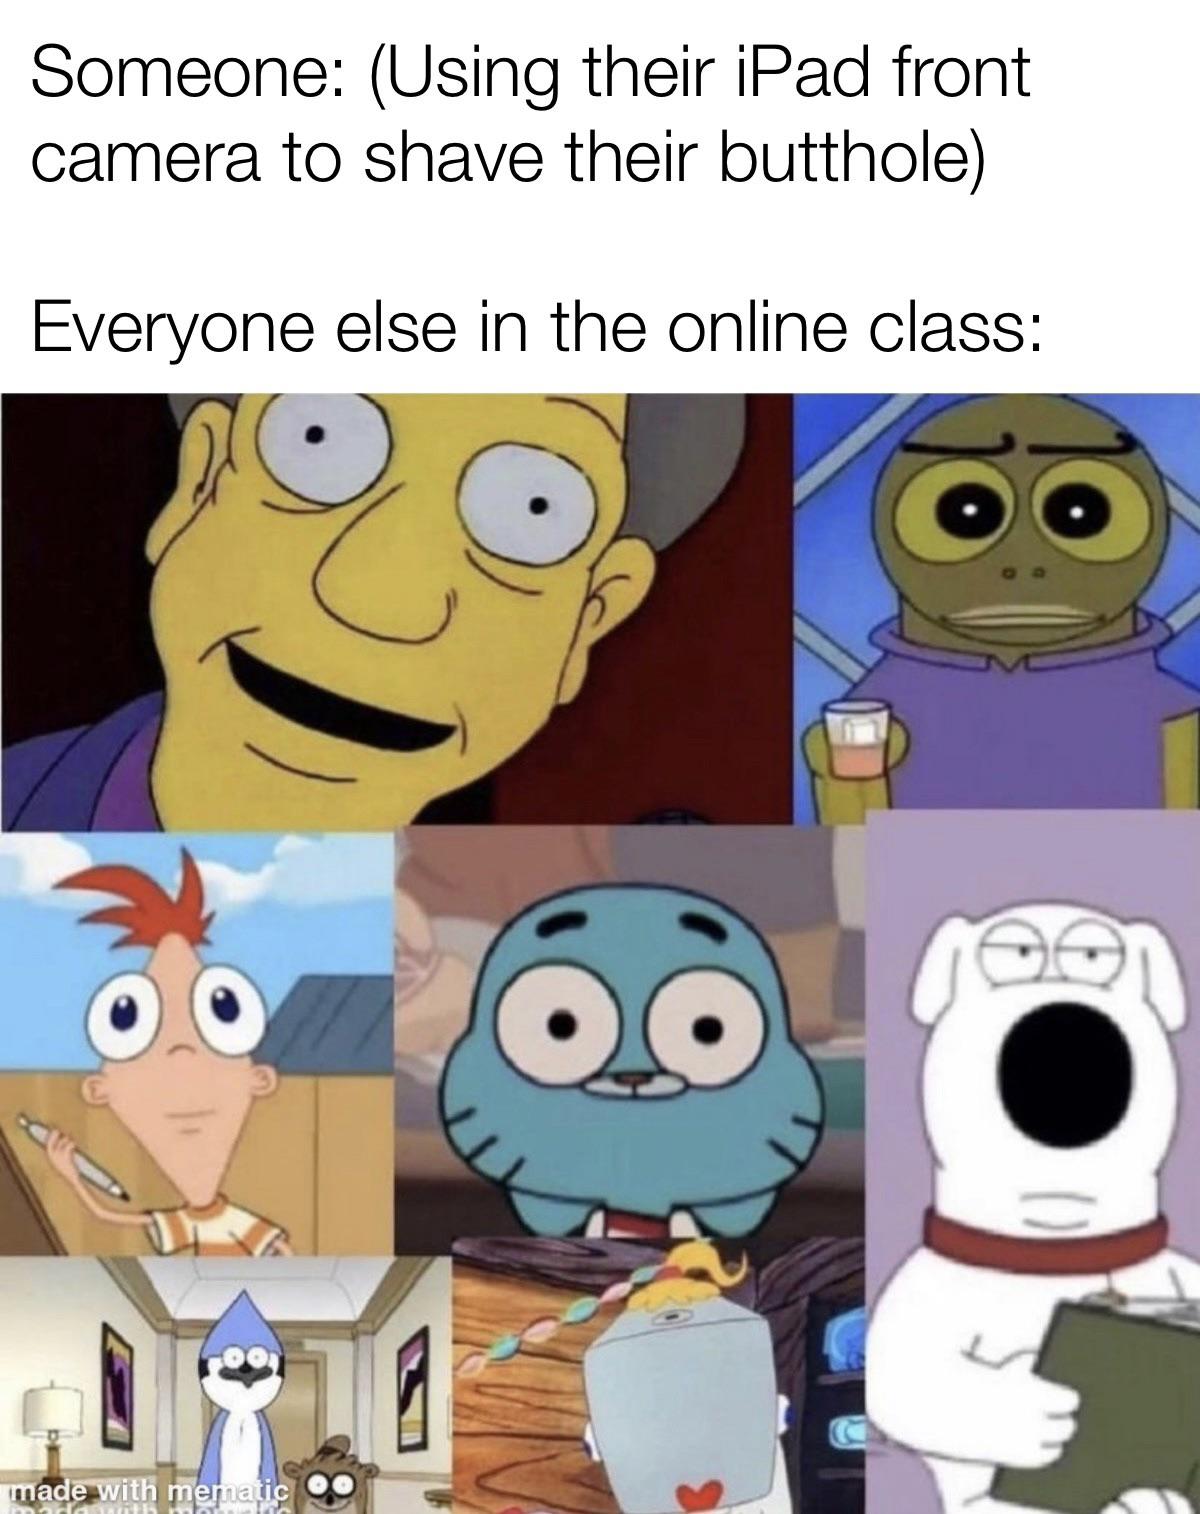 front facing cartoon characters - Someone Using their iPad front camera to shave their butthole Everyone else in the online class made with mematic